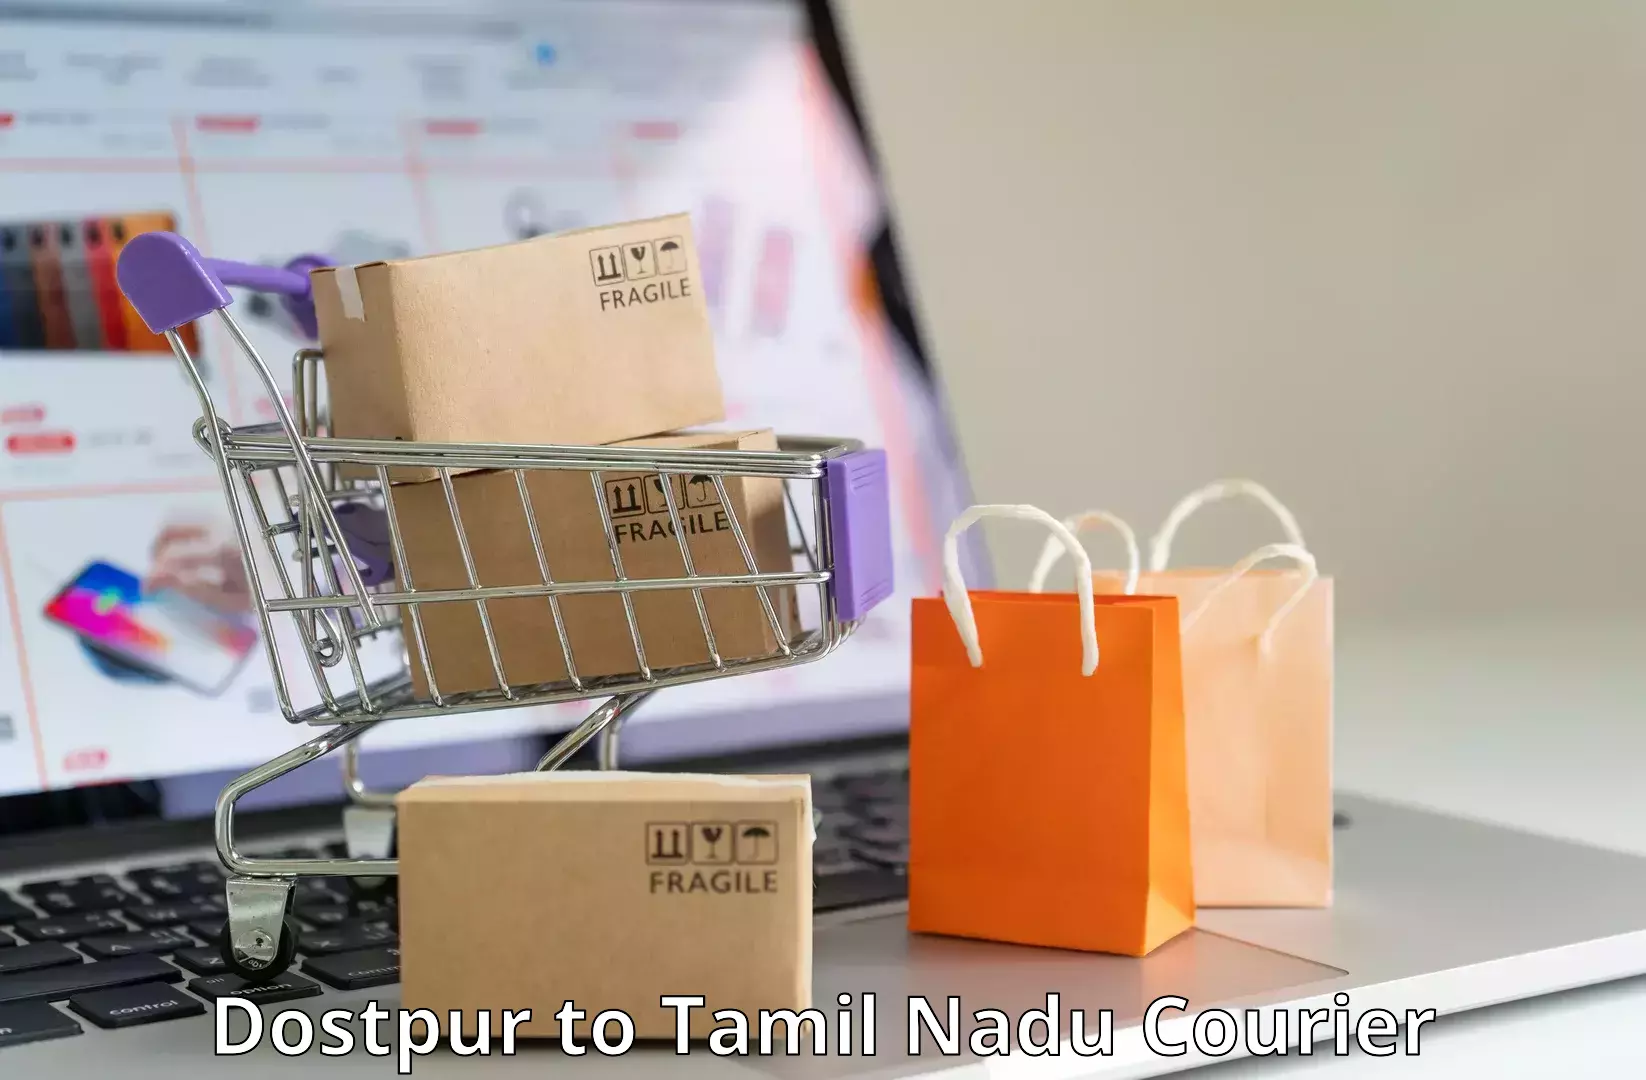 Rapid shipping services Dostpur to Chennai